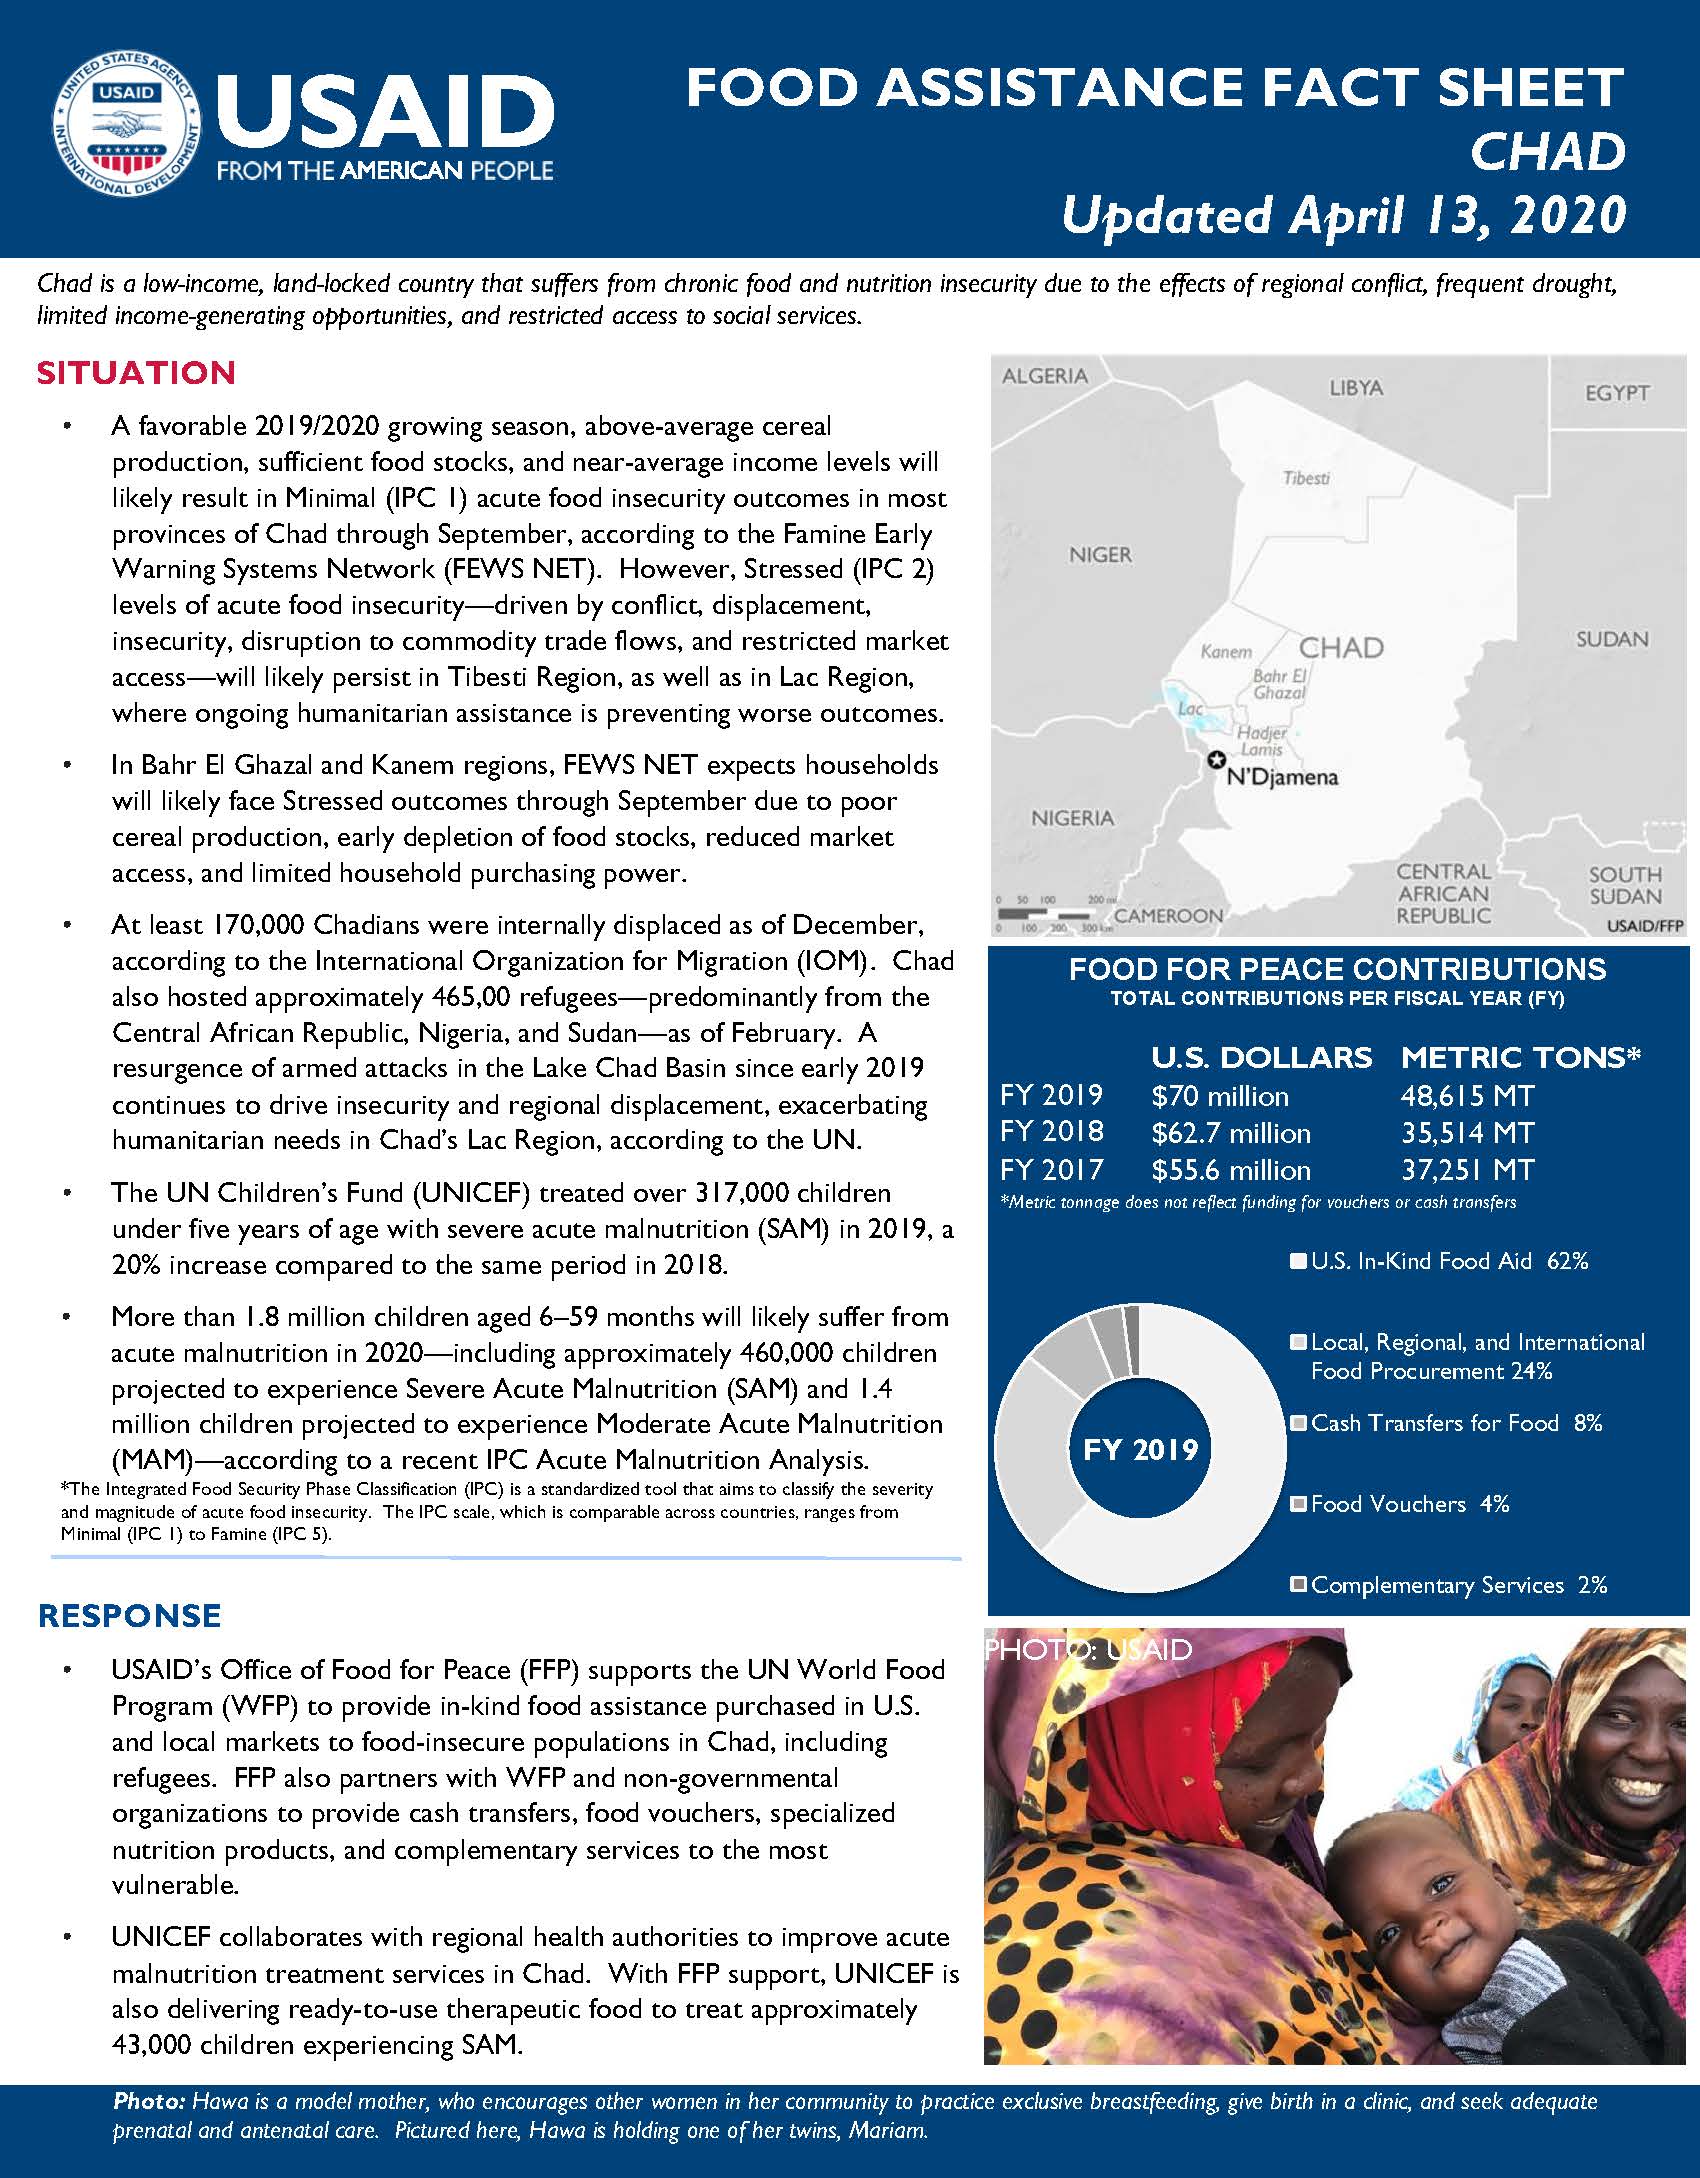 Food Assistance Fact Sheet - Chad